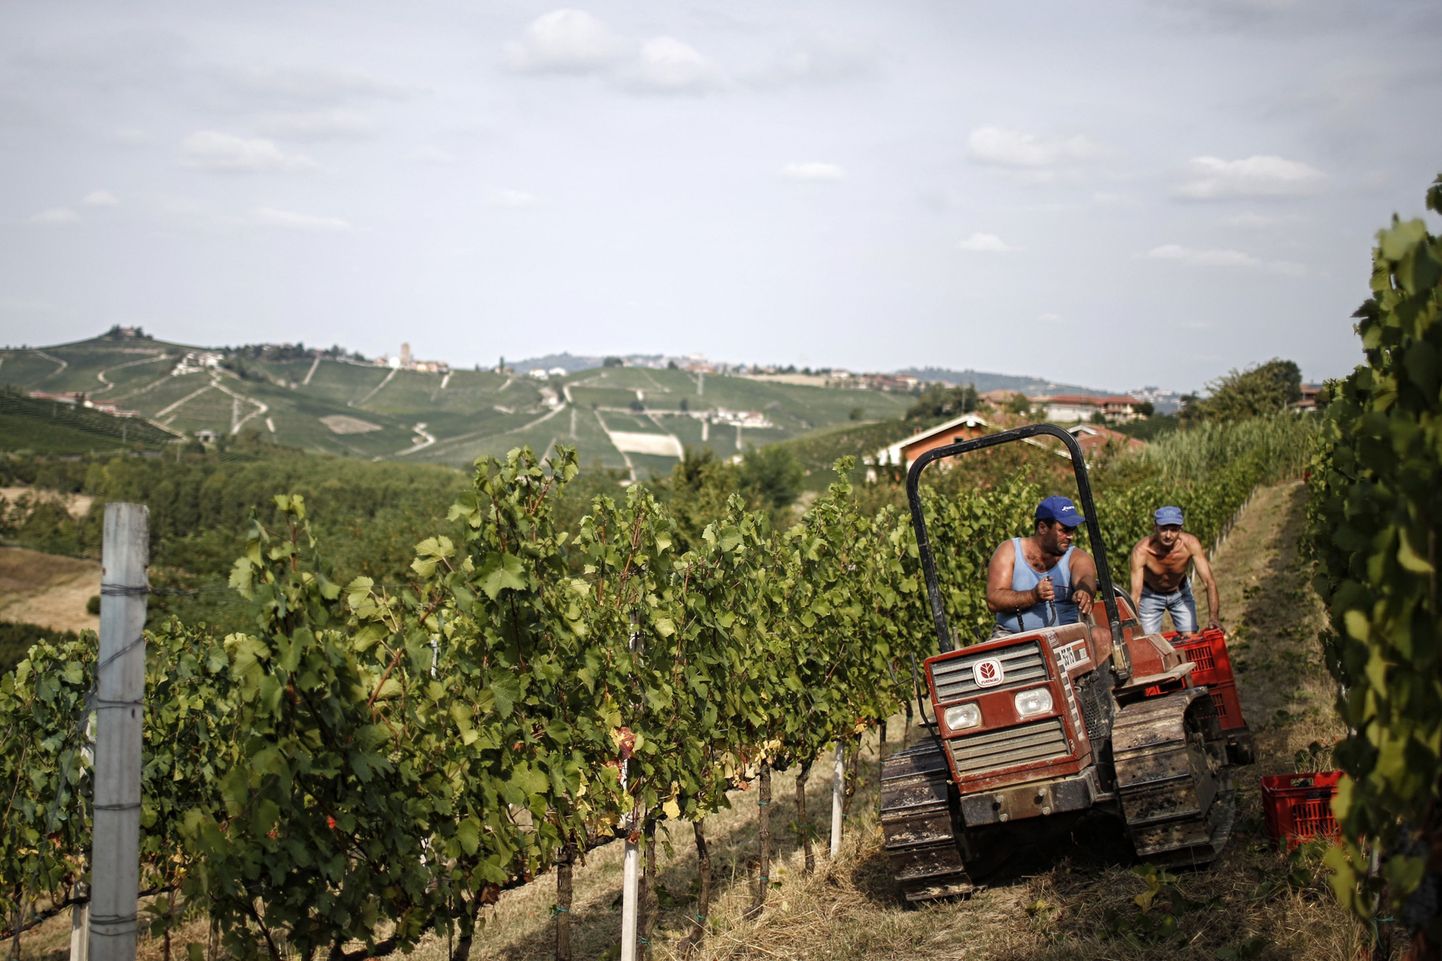 Grape-pickers work in a vineyard of Pinot Nero during the harvest on August 8, 2017 at the Tenuta Castello di Neive Borgonovo, northwestern Italy. Italy's annual wine harvest, the biggest in the world, is off to its earliest start in a decade as the country swelters in a heatwave following months of drought.
 
Winemakers have also had to contend with spring frosts and hailstorms this year and the country's agri-food agency Coldiretti is anticipating a 10-15 percent fall in volumes.
 / AFP PHOTO / Marco BERTORELLO